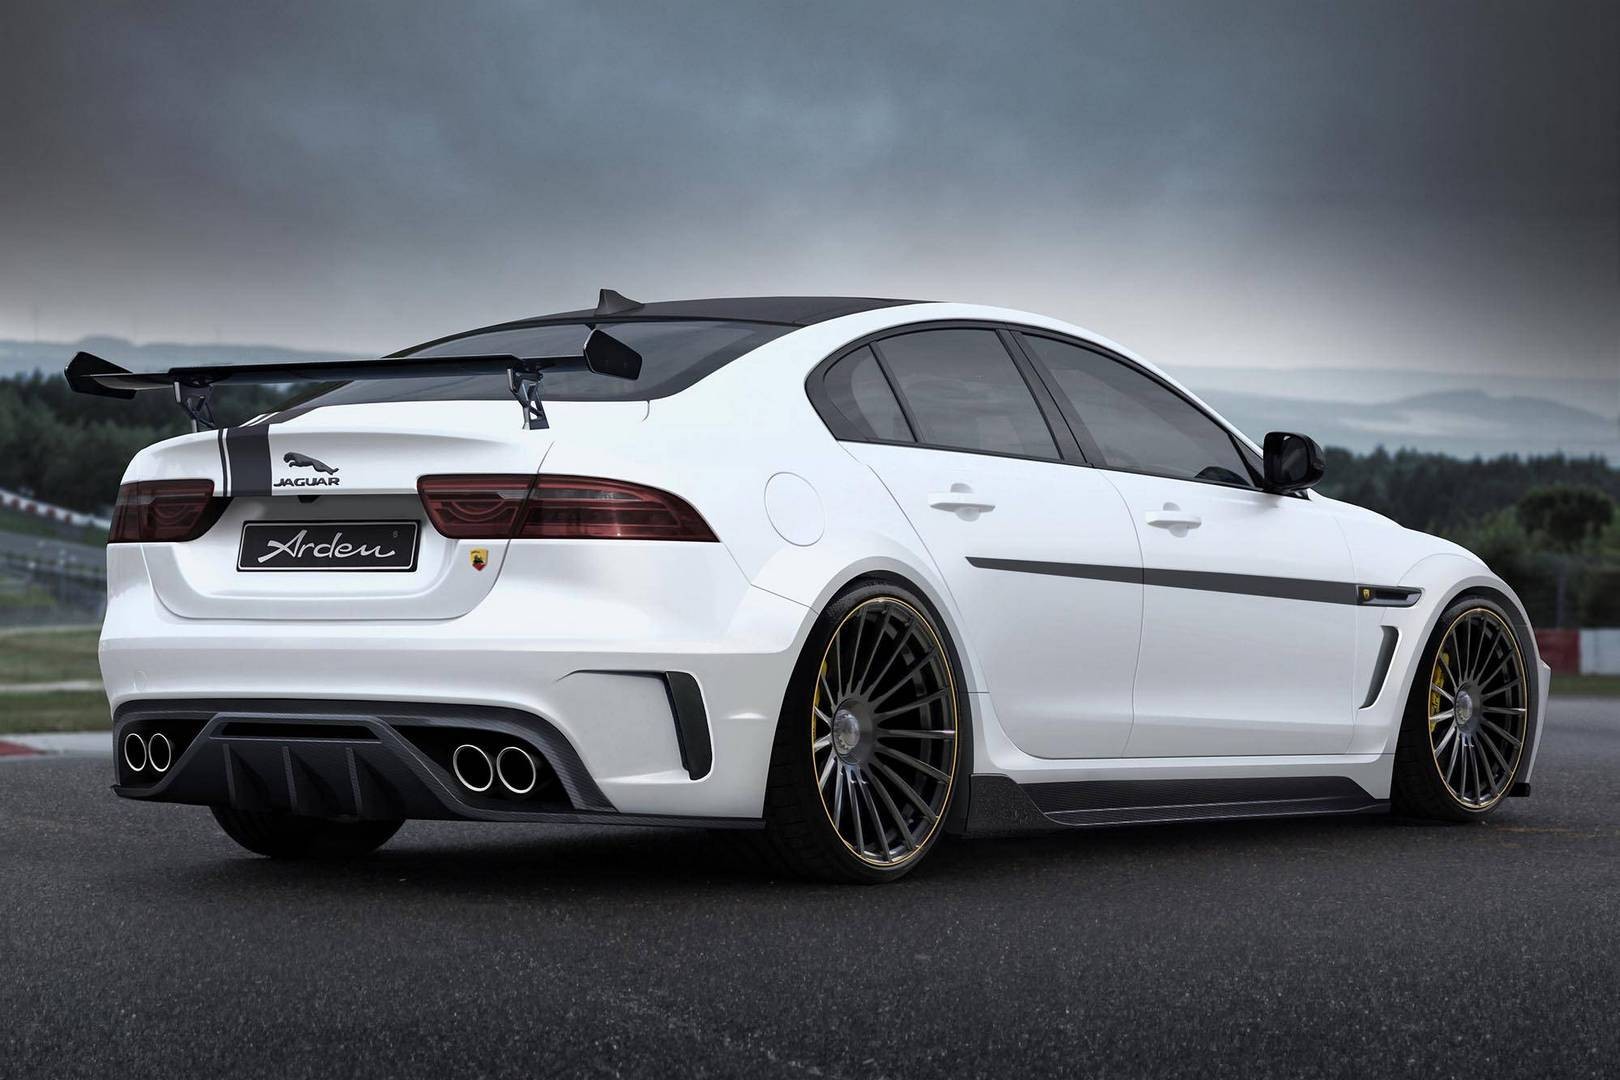 Jaguar XE Gets Widebody Kit from Arden, Supercharged V6 Makes 463 HP ...